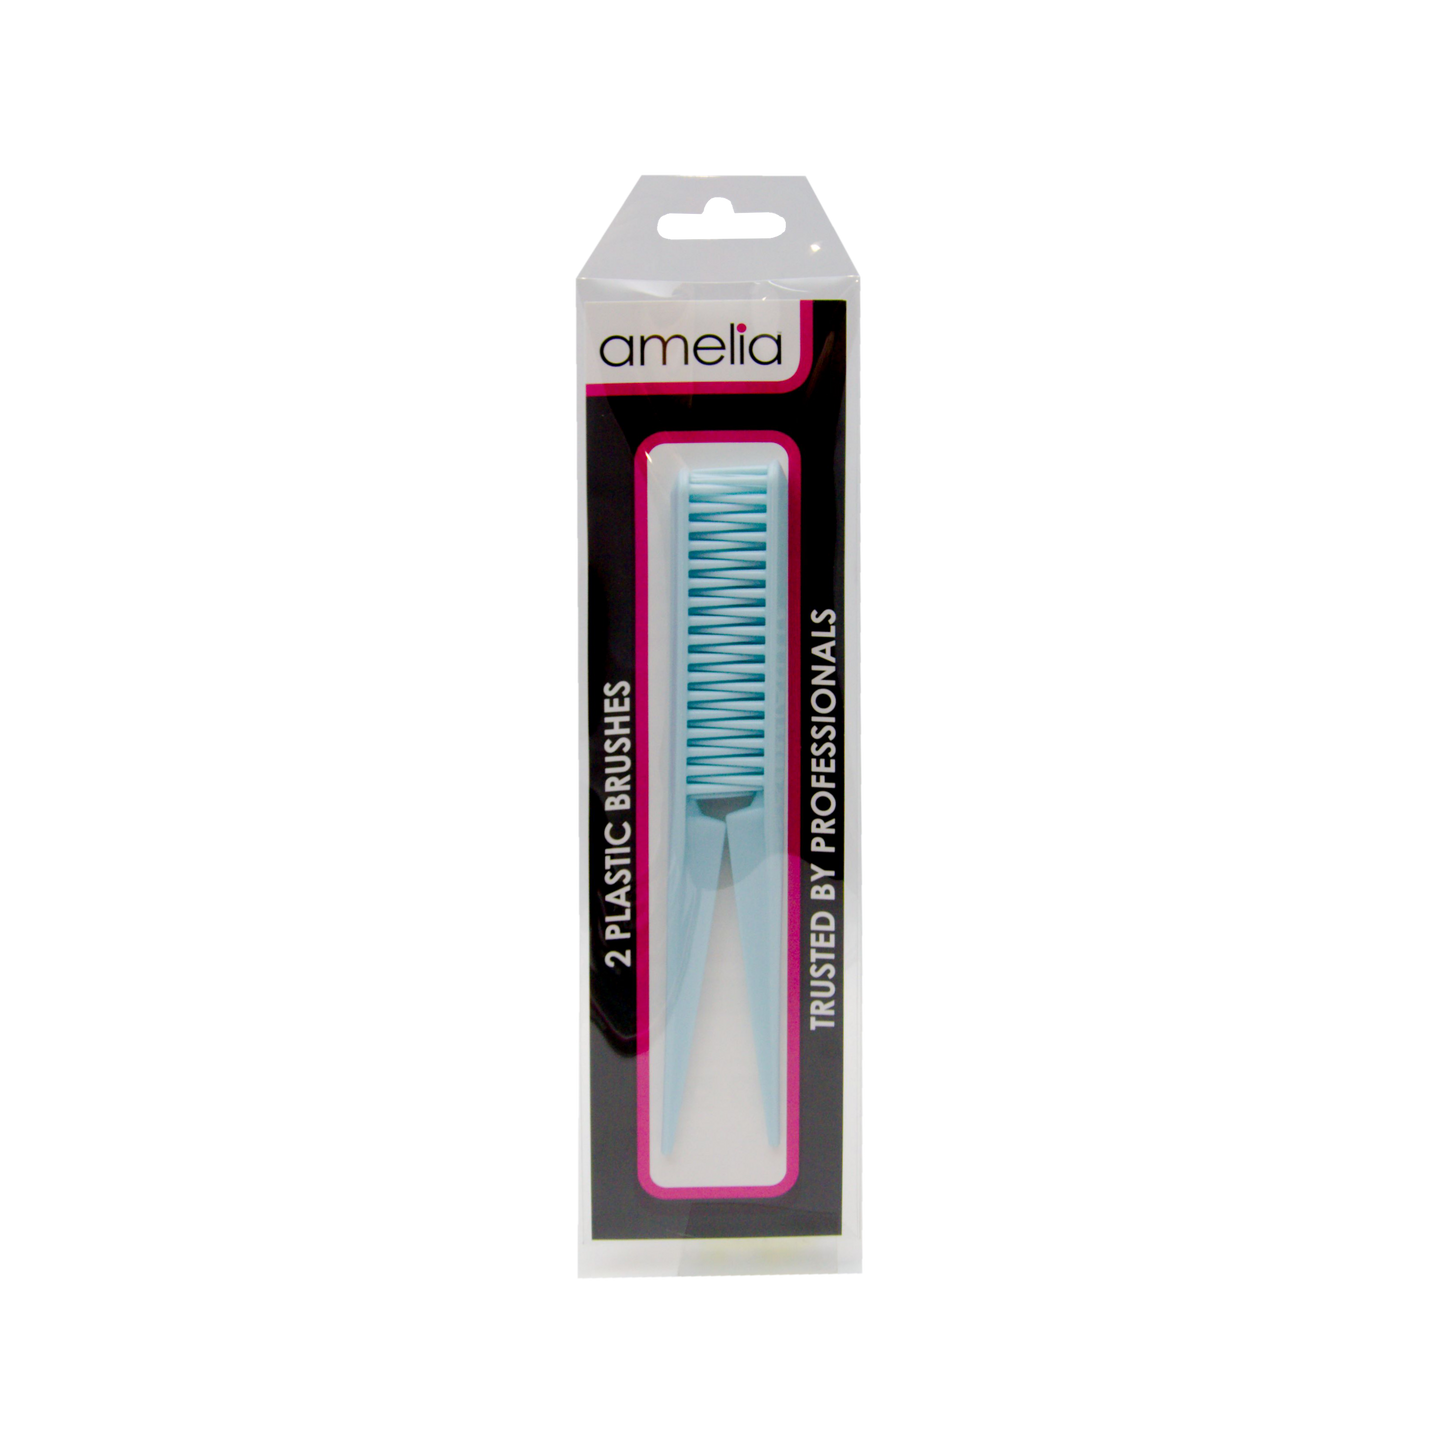 Amelia Beauty, 7in, 3 Row Styling Comb For Detangling, Tease, Defining And Separating Curls - Sky Blue - 12 Retail Packs